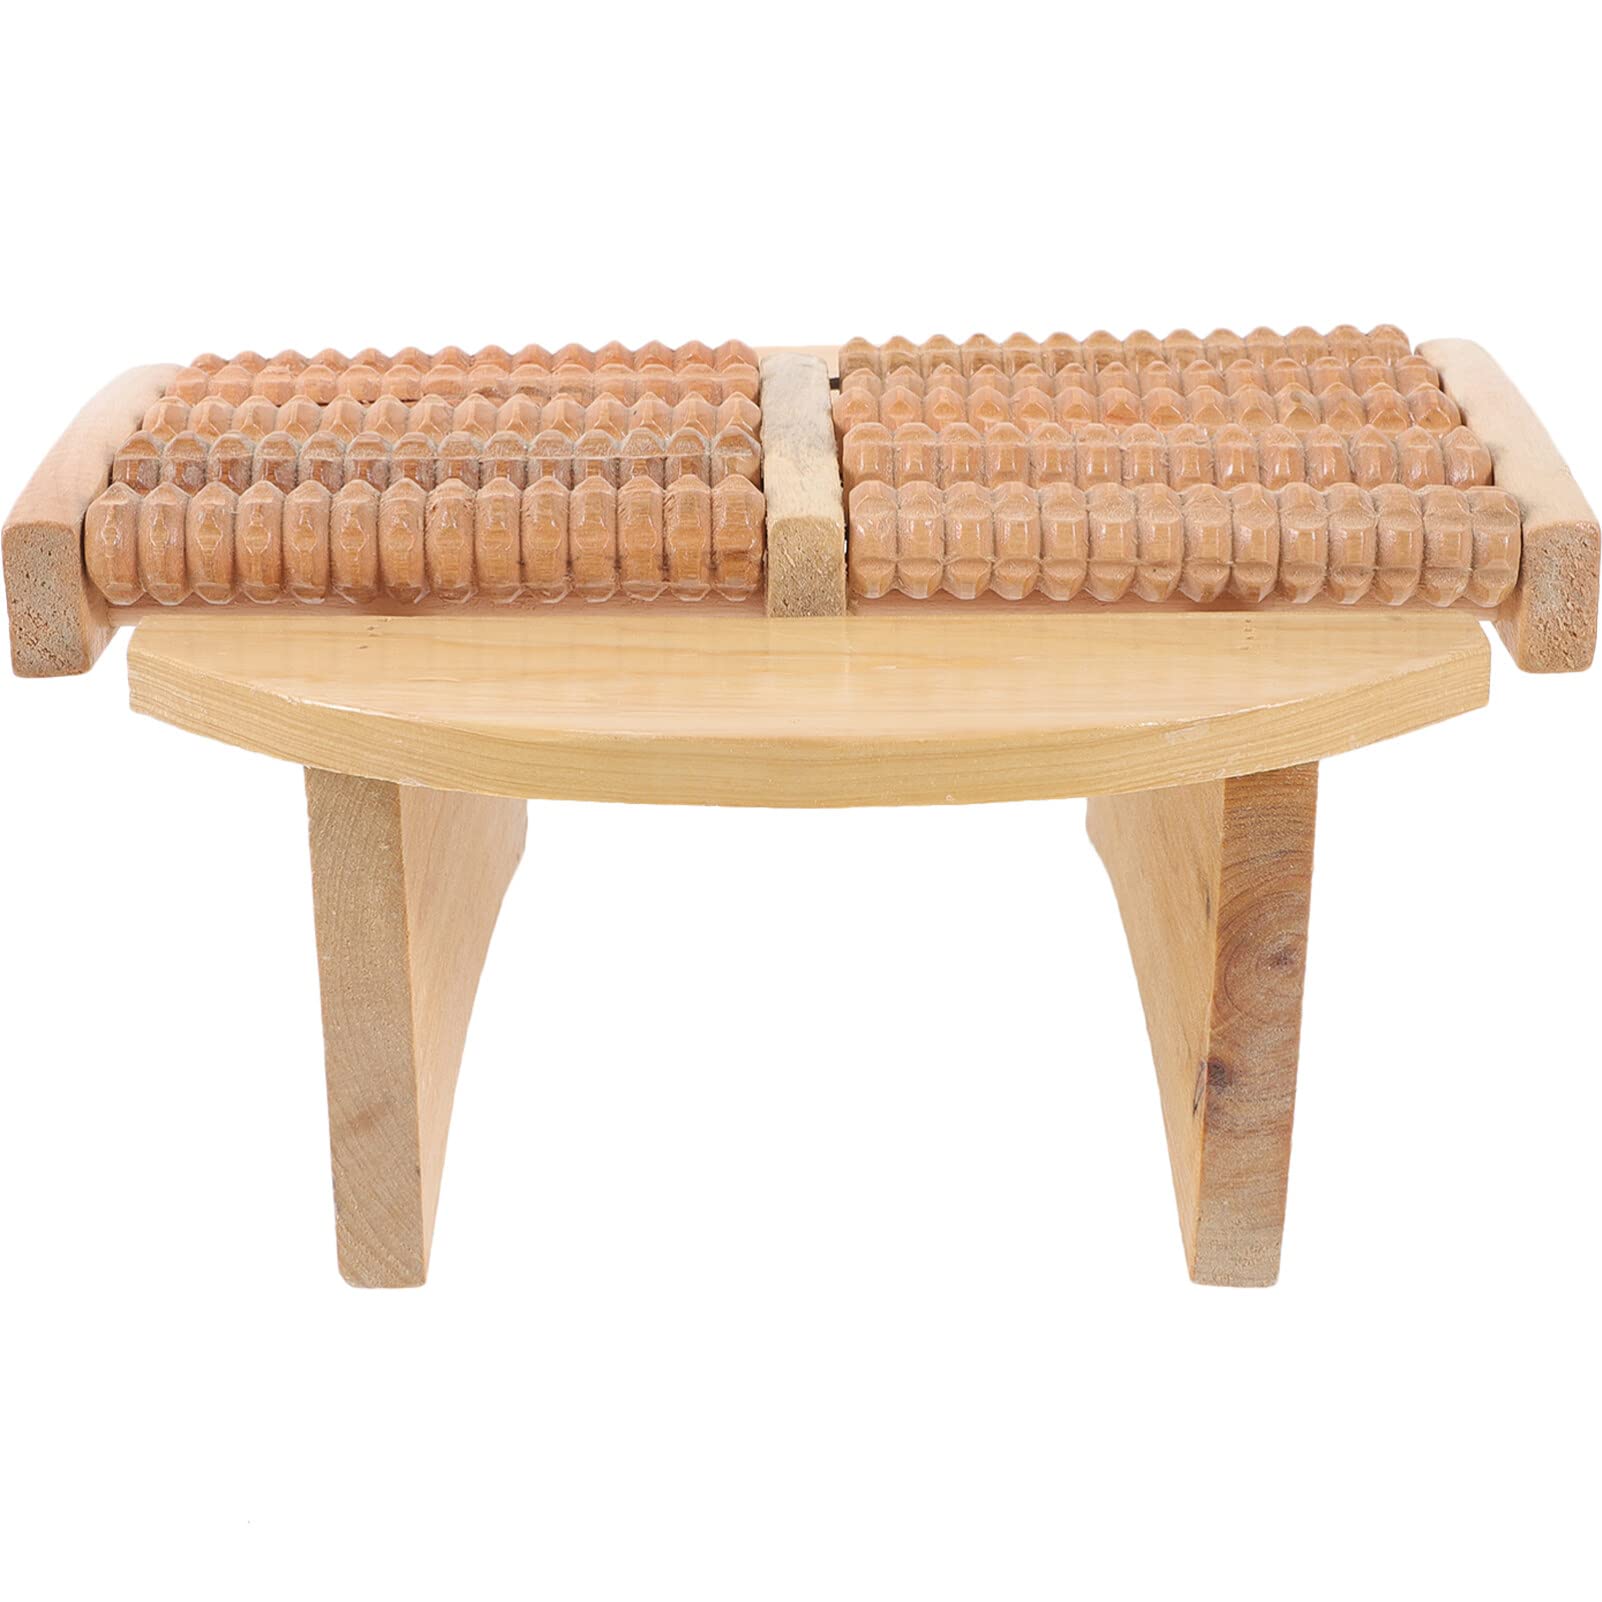 Healifty Sauna Stool Foot Tool Wood Step Footstool Wooden Foot Massager Foot Rest Bath Foot Massager Toilet Stool Gifts Portable Step Stool Sauna Wood footrest Under The Table Solid Wood